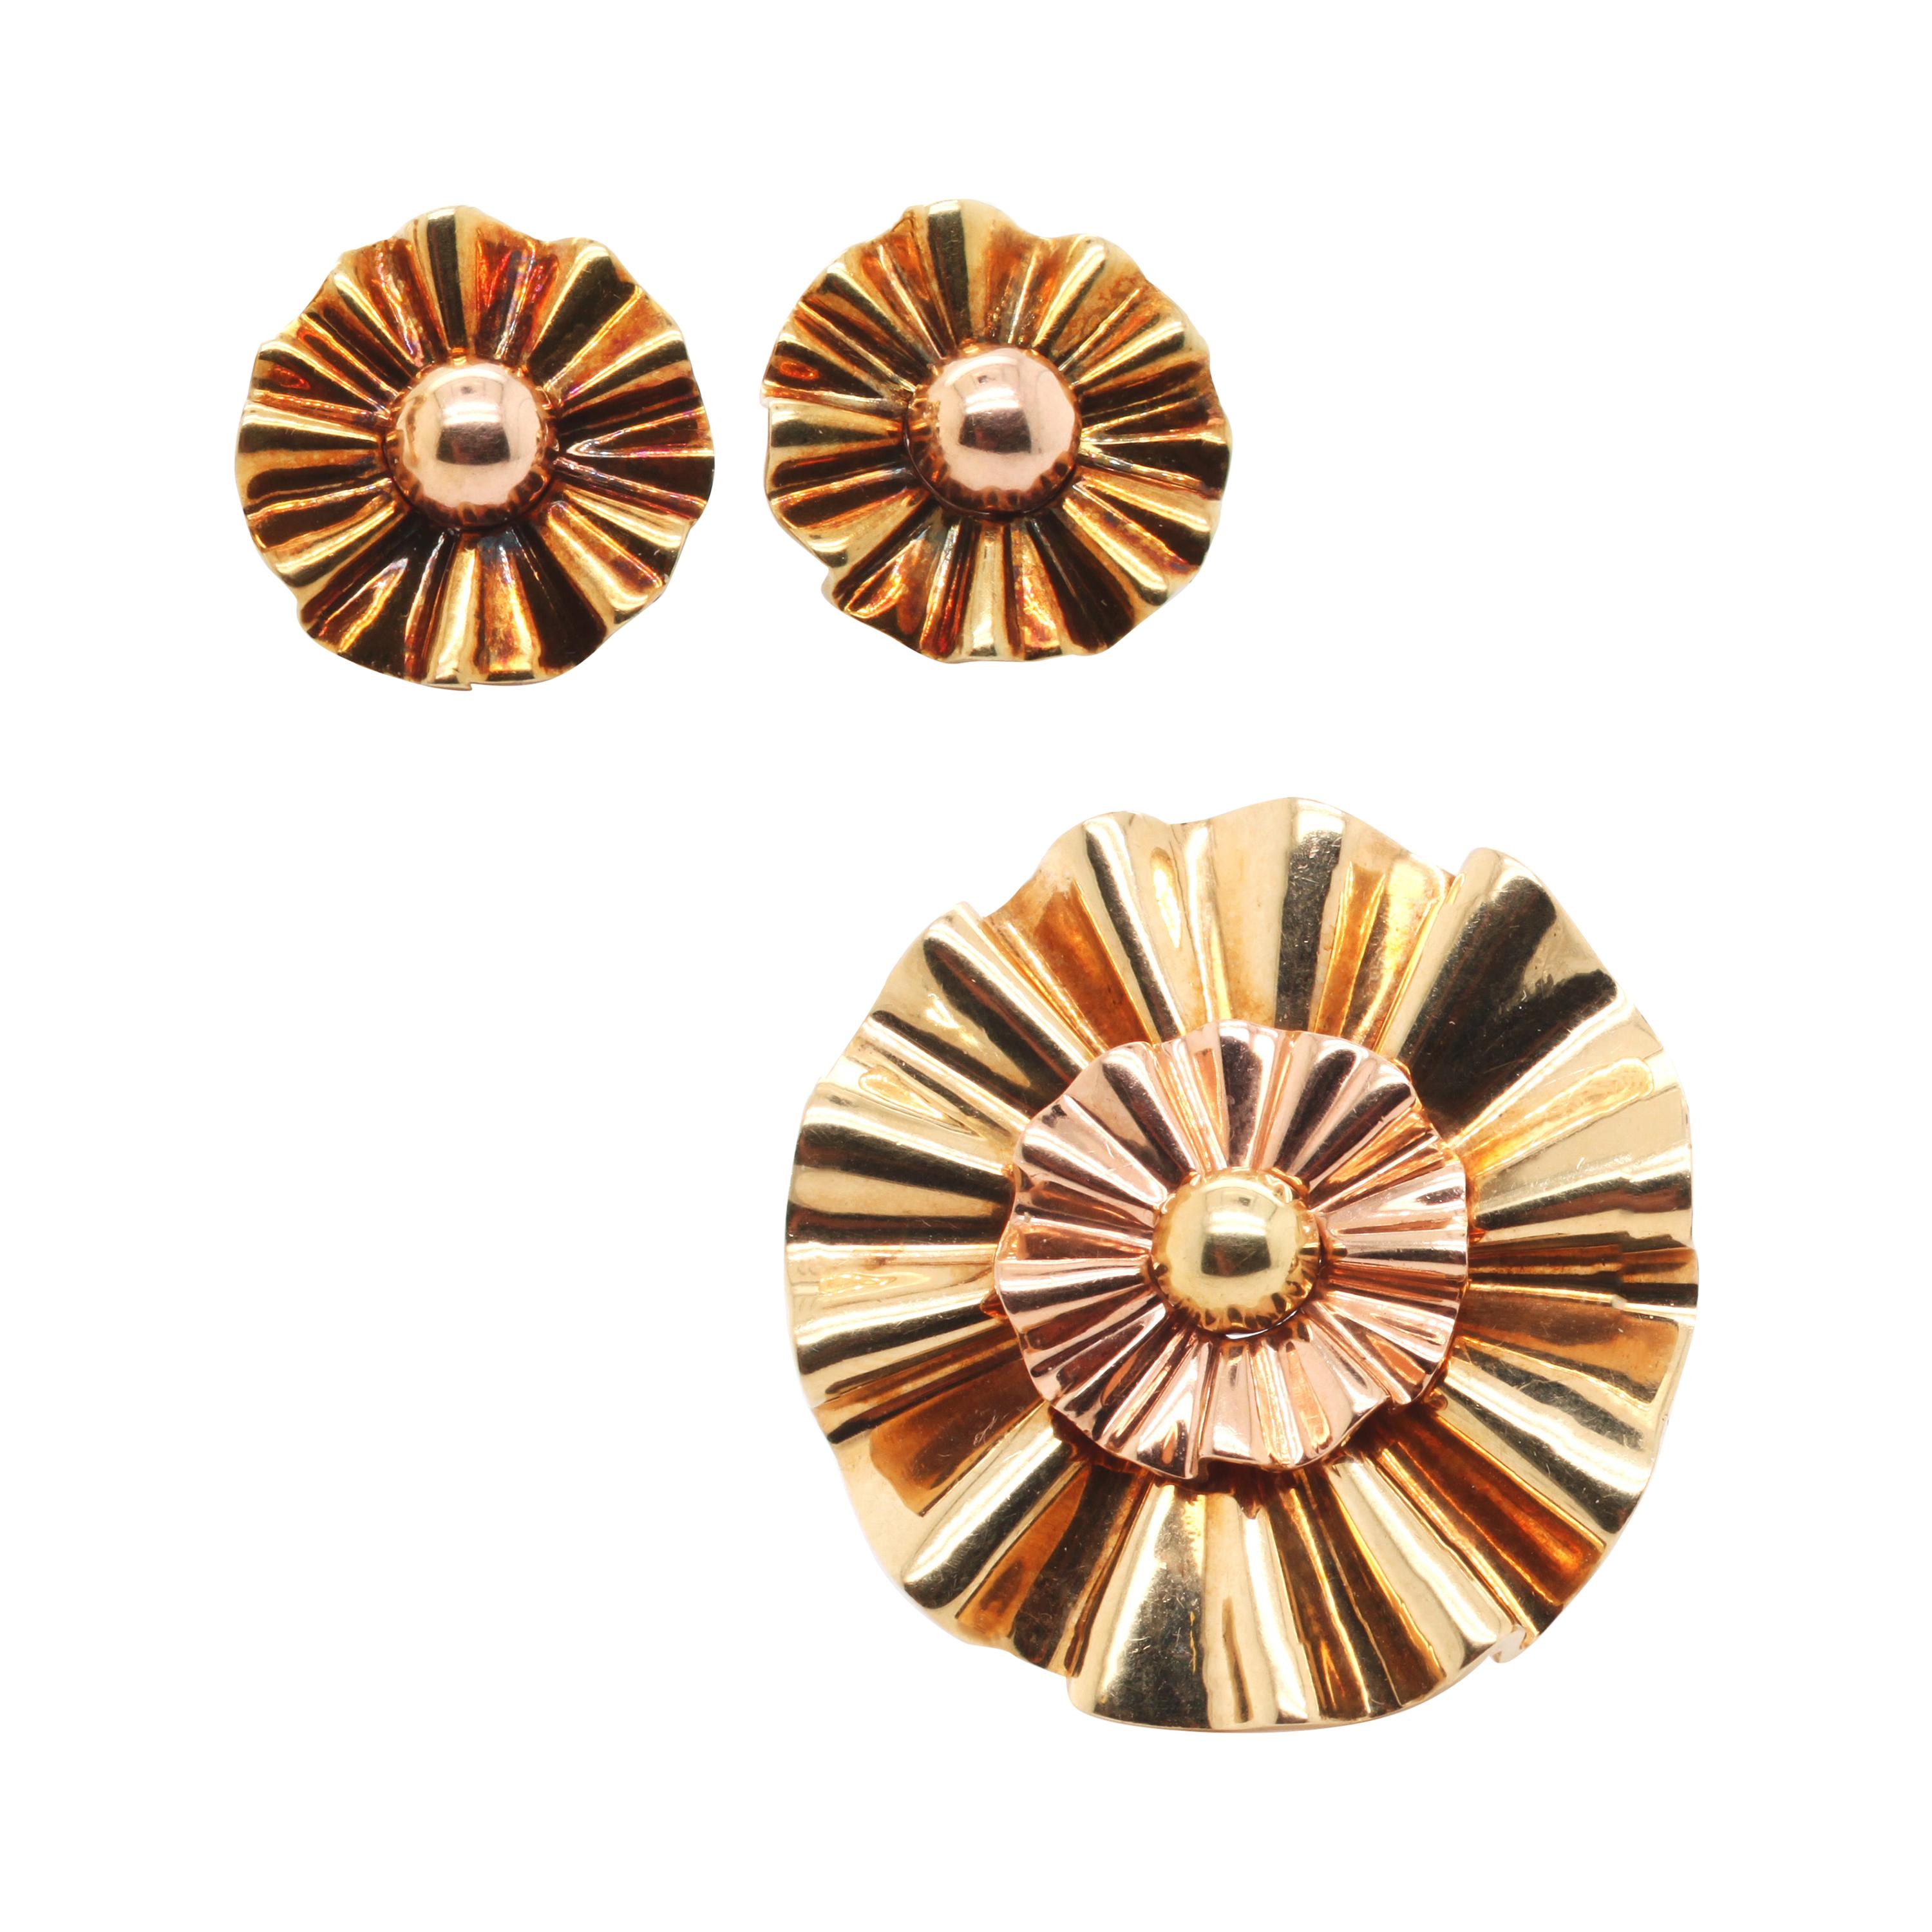 Mauboussin Trabert & Hoeffer Reflection Gold Earclips and Brooch Set circa 1940s For Sale